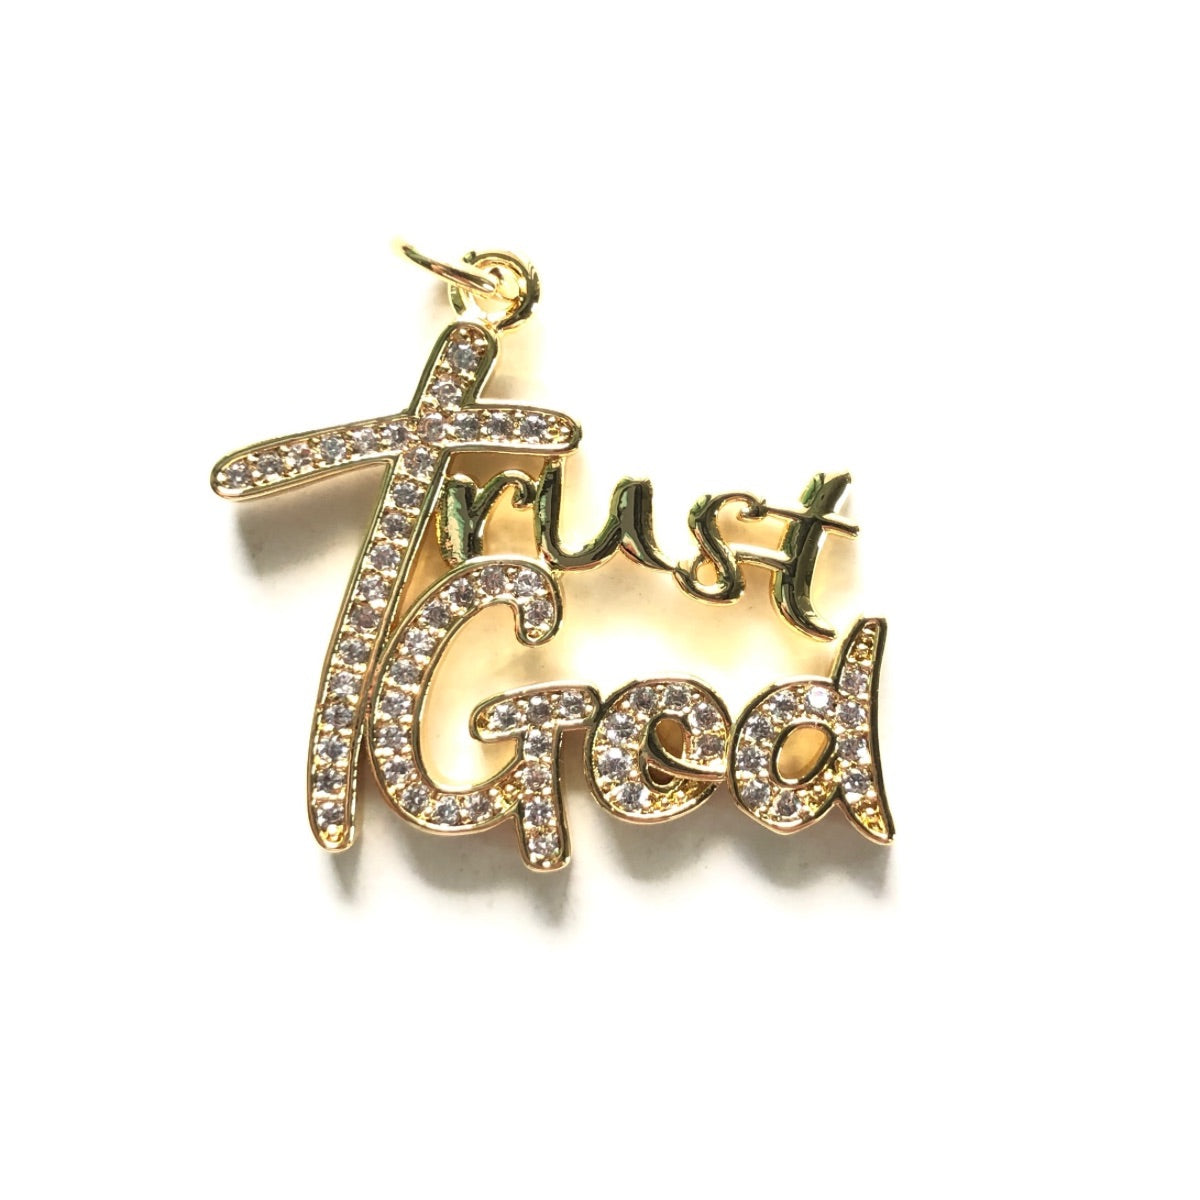 10pcs/lot 32*28mm CZ Pave Trust God Word Charms CZ Paved Charms Christian Quotes New Charms Arrivals Charms Beads Beyond